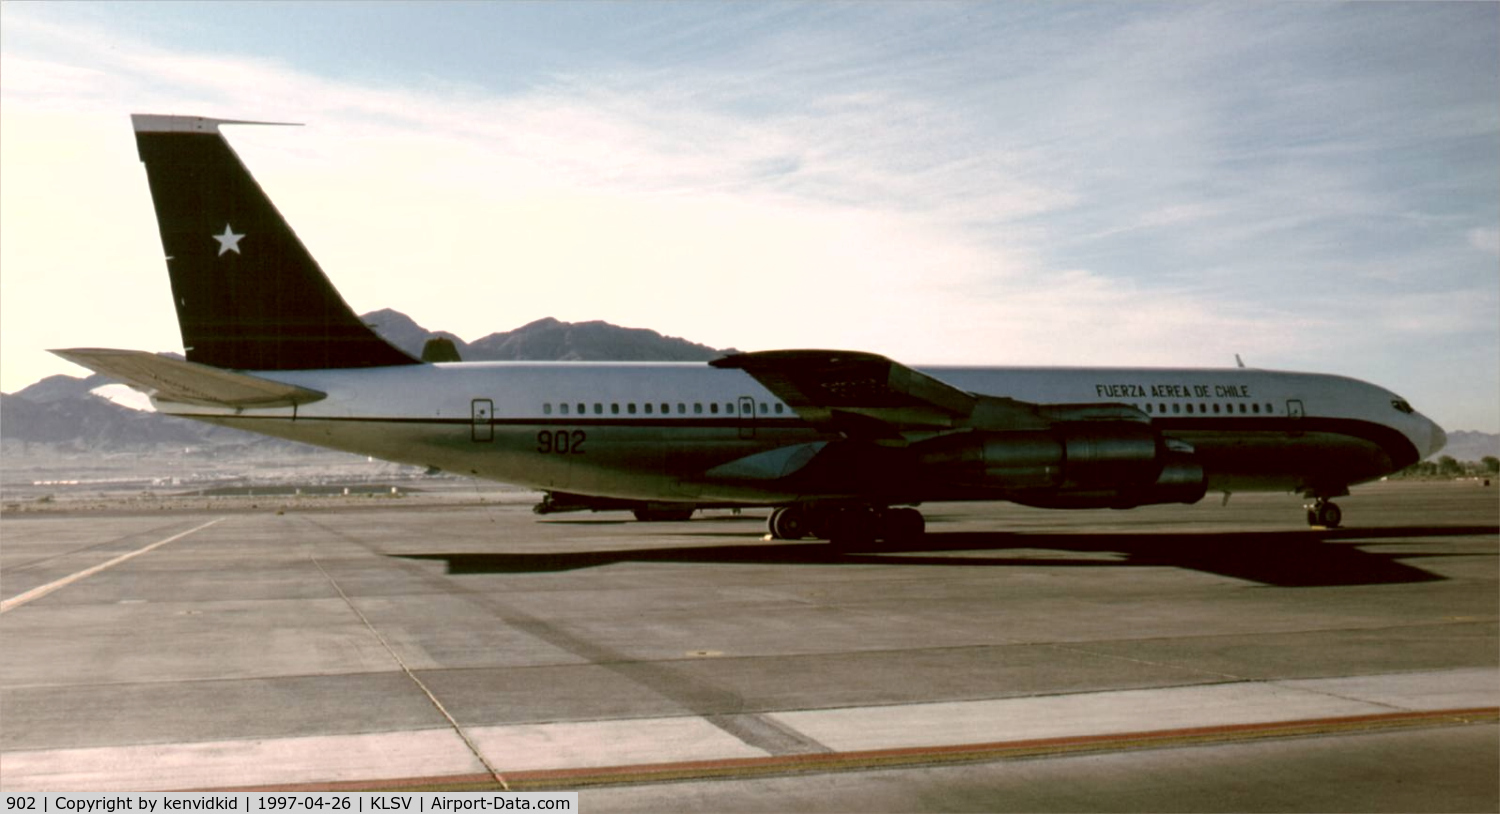 902, 1967 Boeing 707-351C C/N 19443, At the 1997 50th Anniversary of the USAF air display, Nellis AFB.